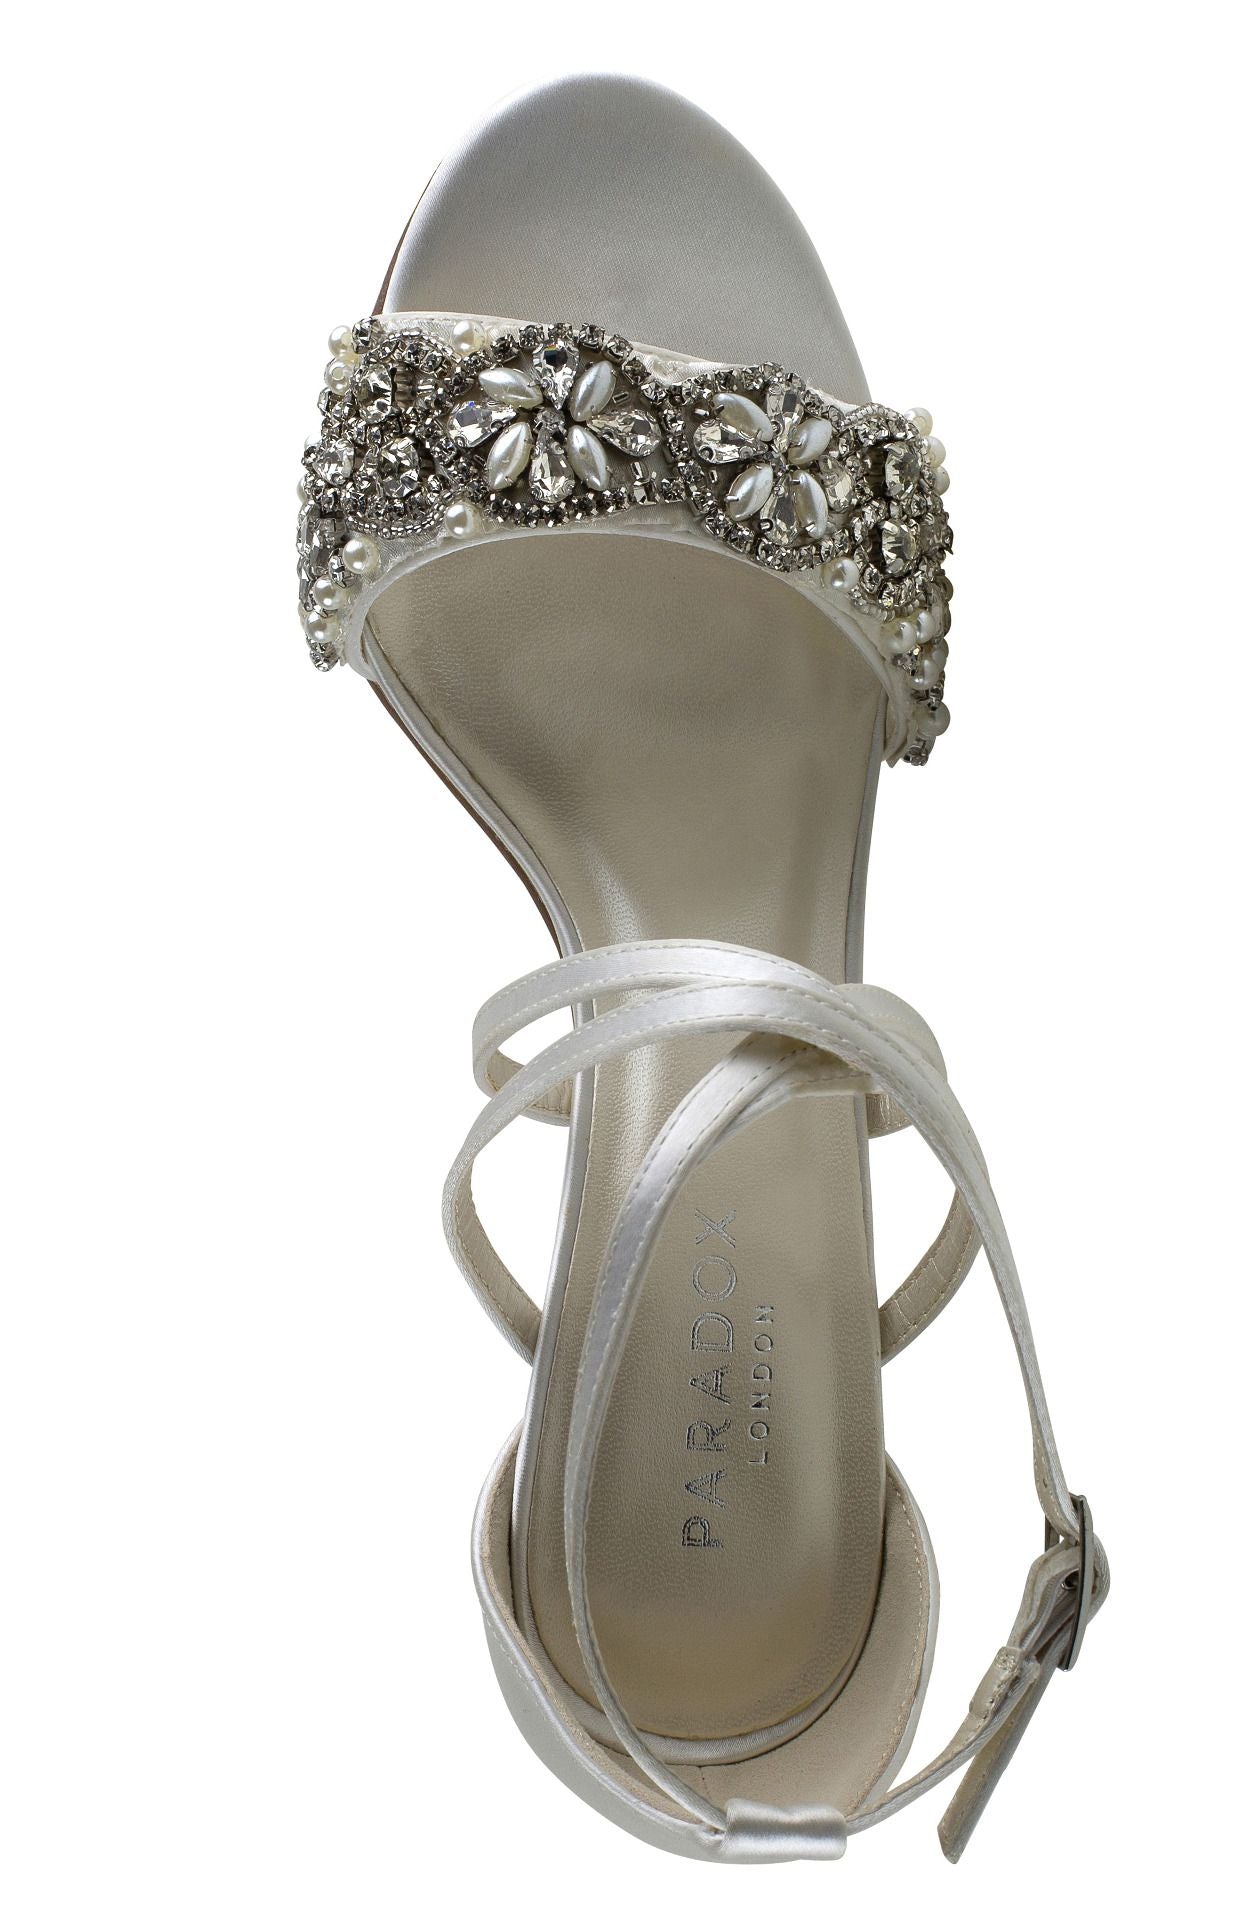 Overhead view of Ivory Sandal with 2.75 inch block heel and decrotive strap